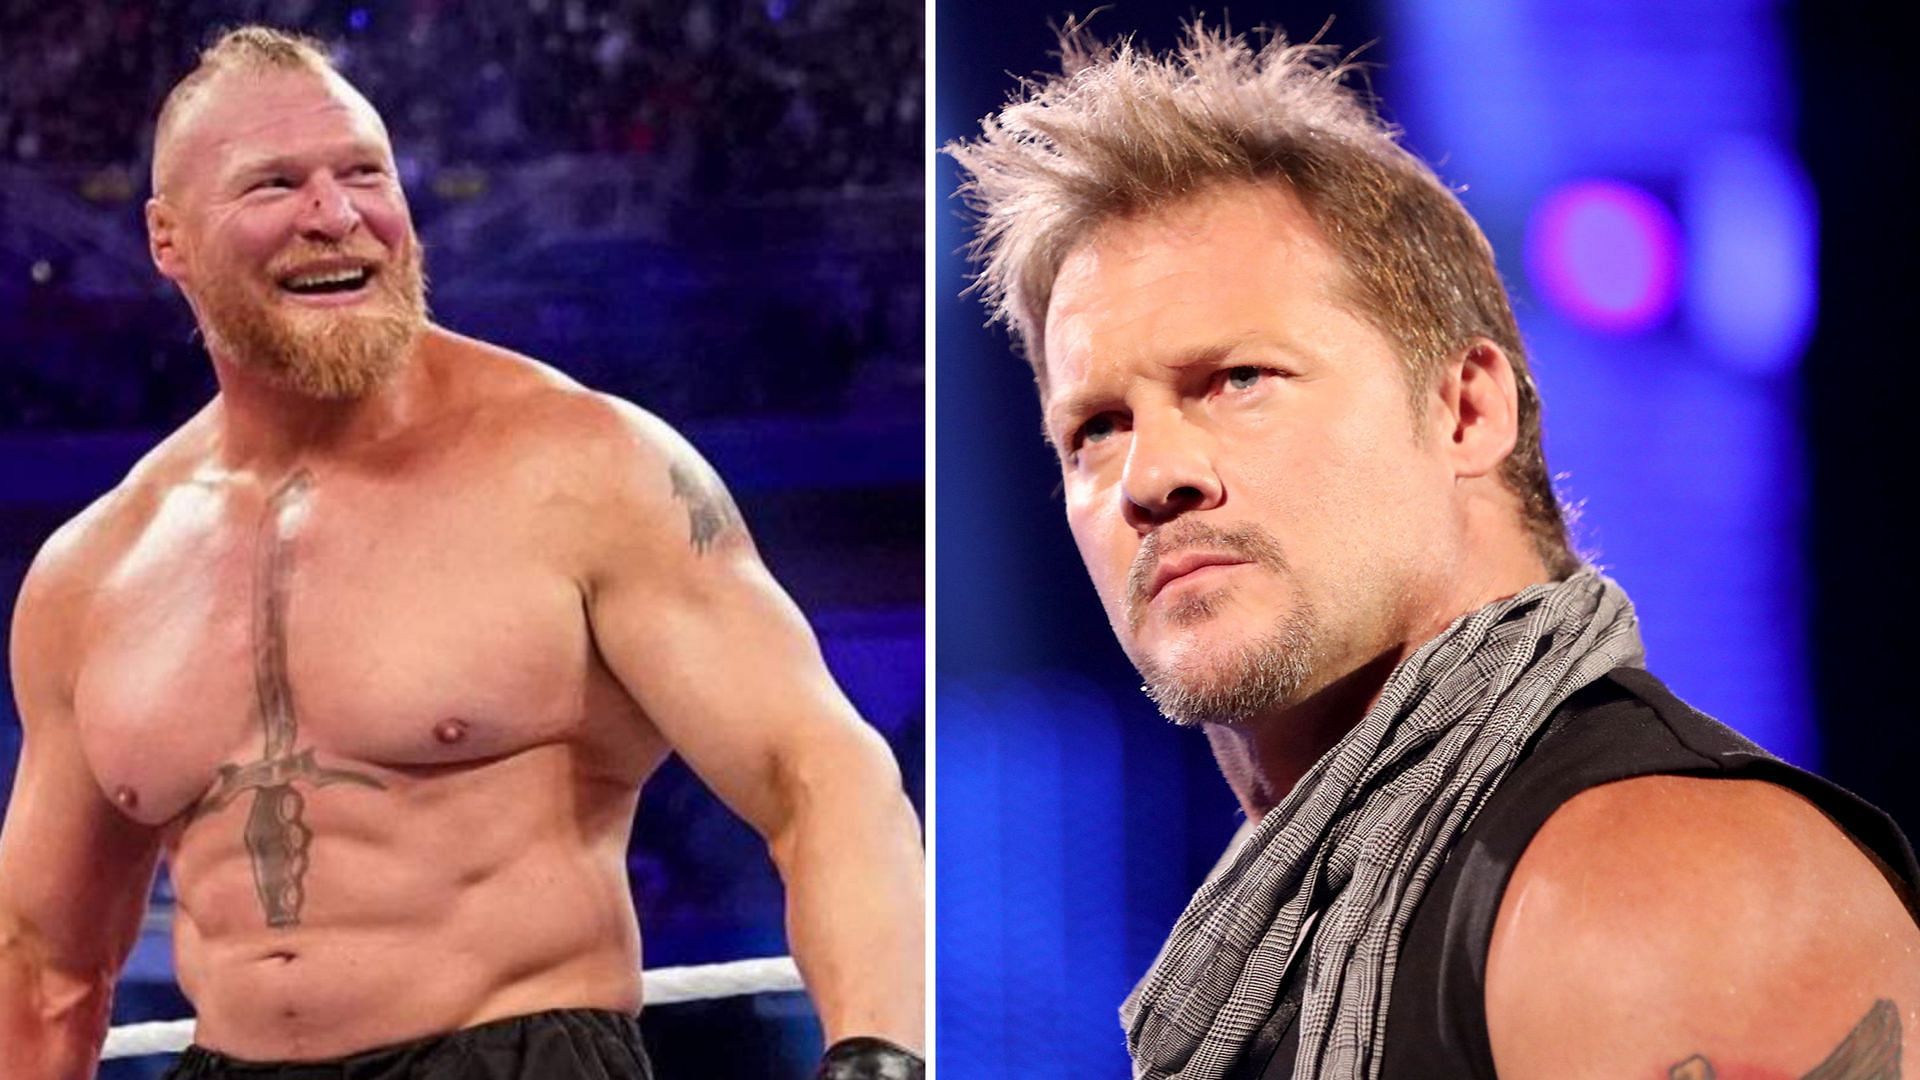 Chris Jericho and Brock Lesnar had an infamous backstage argument at SummerSlam 2016